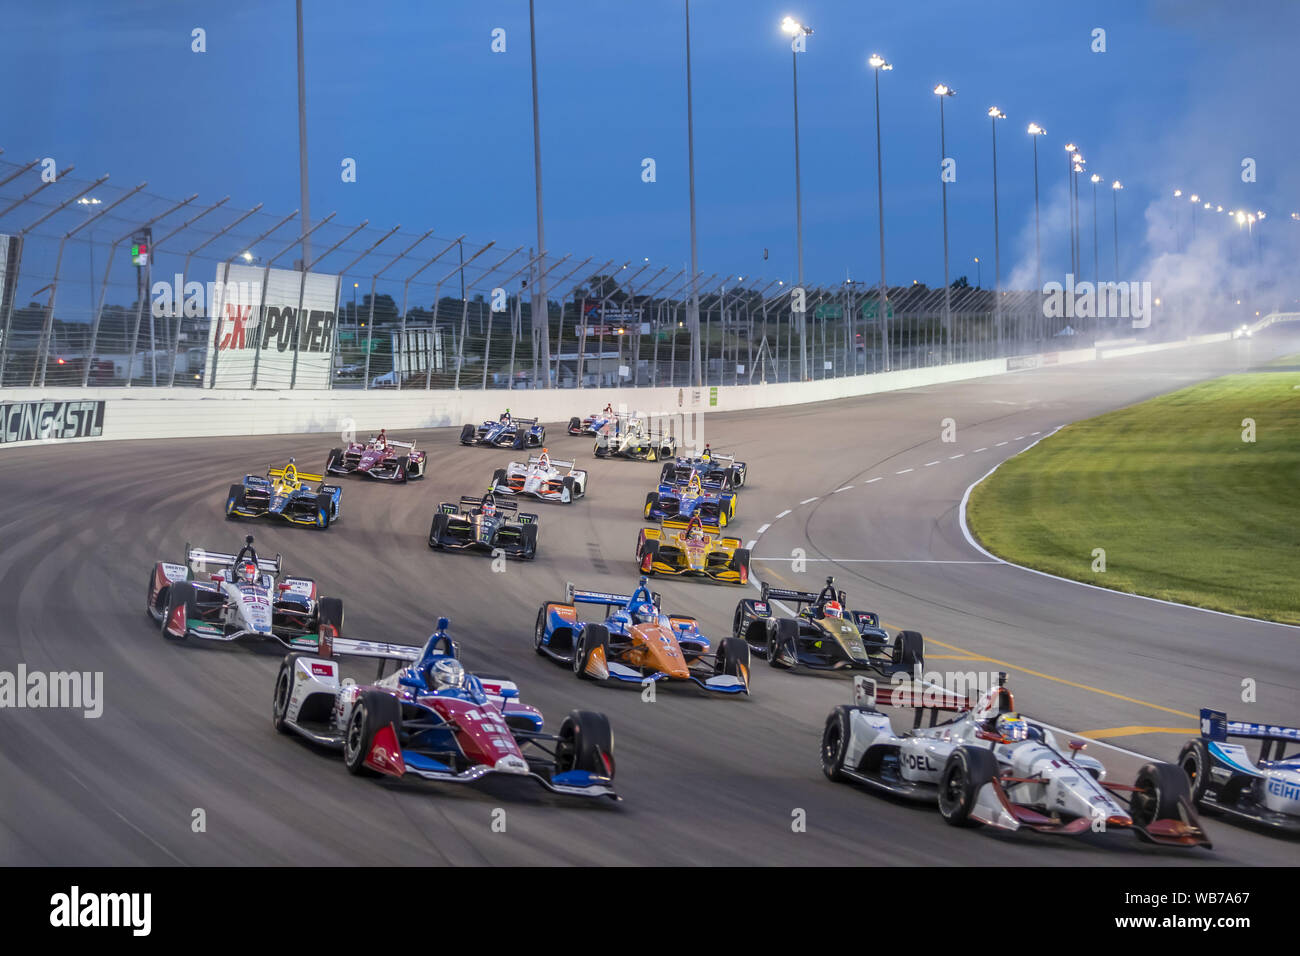 Madison, Illinois, USA. 24th Aug, 2019. The NTT IndyCar Series teams take the green flag to start the race for the Bommarito Automotive Group 500 at World Wide Technology Raceway in Madison Illinois. (Credit Image: © Walter G Arce Sr Grindstone Medi/ASP) Credit: ZUMA Press, Inc./Alamy Live News Stock Photo